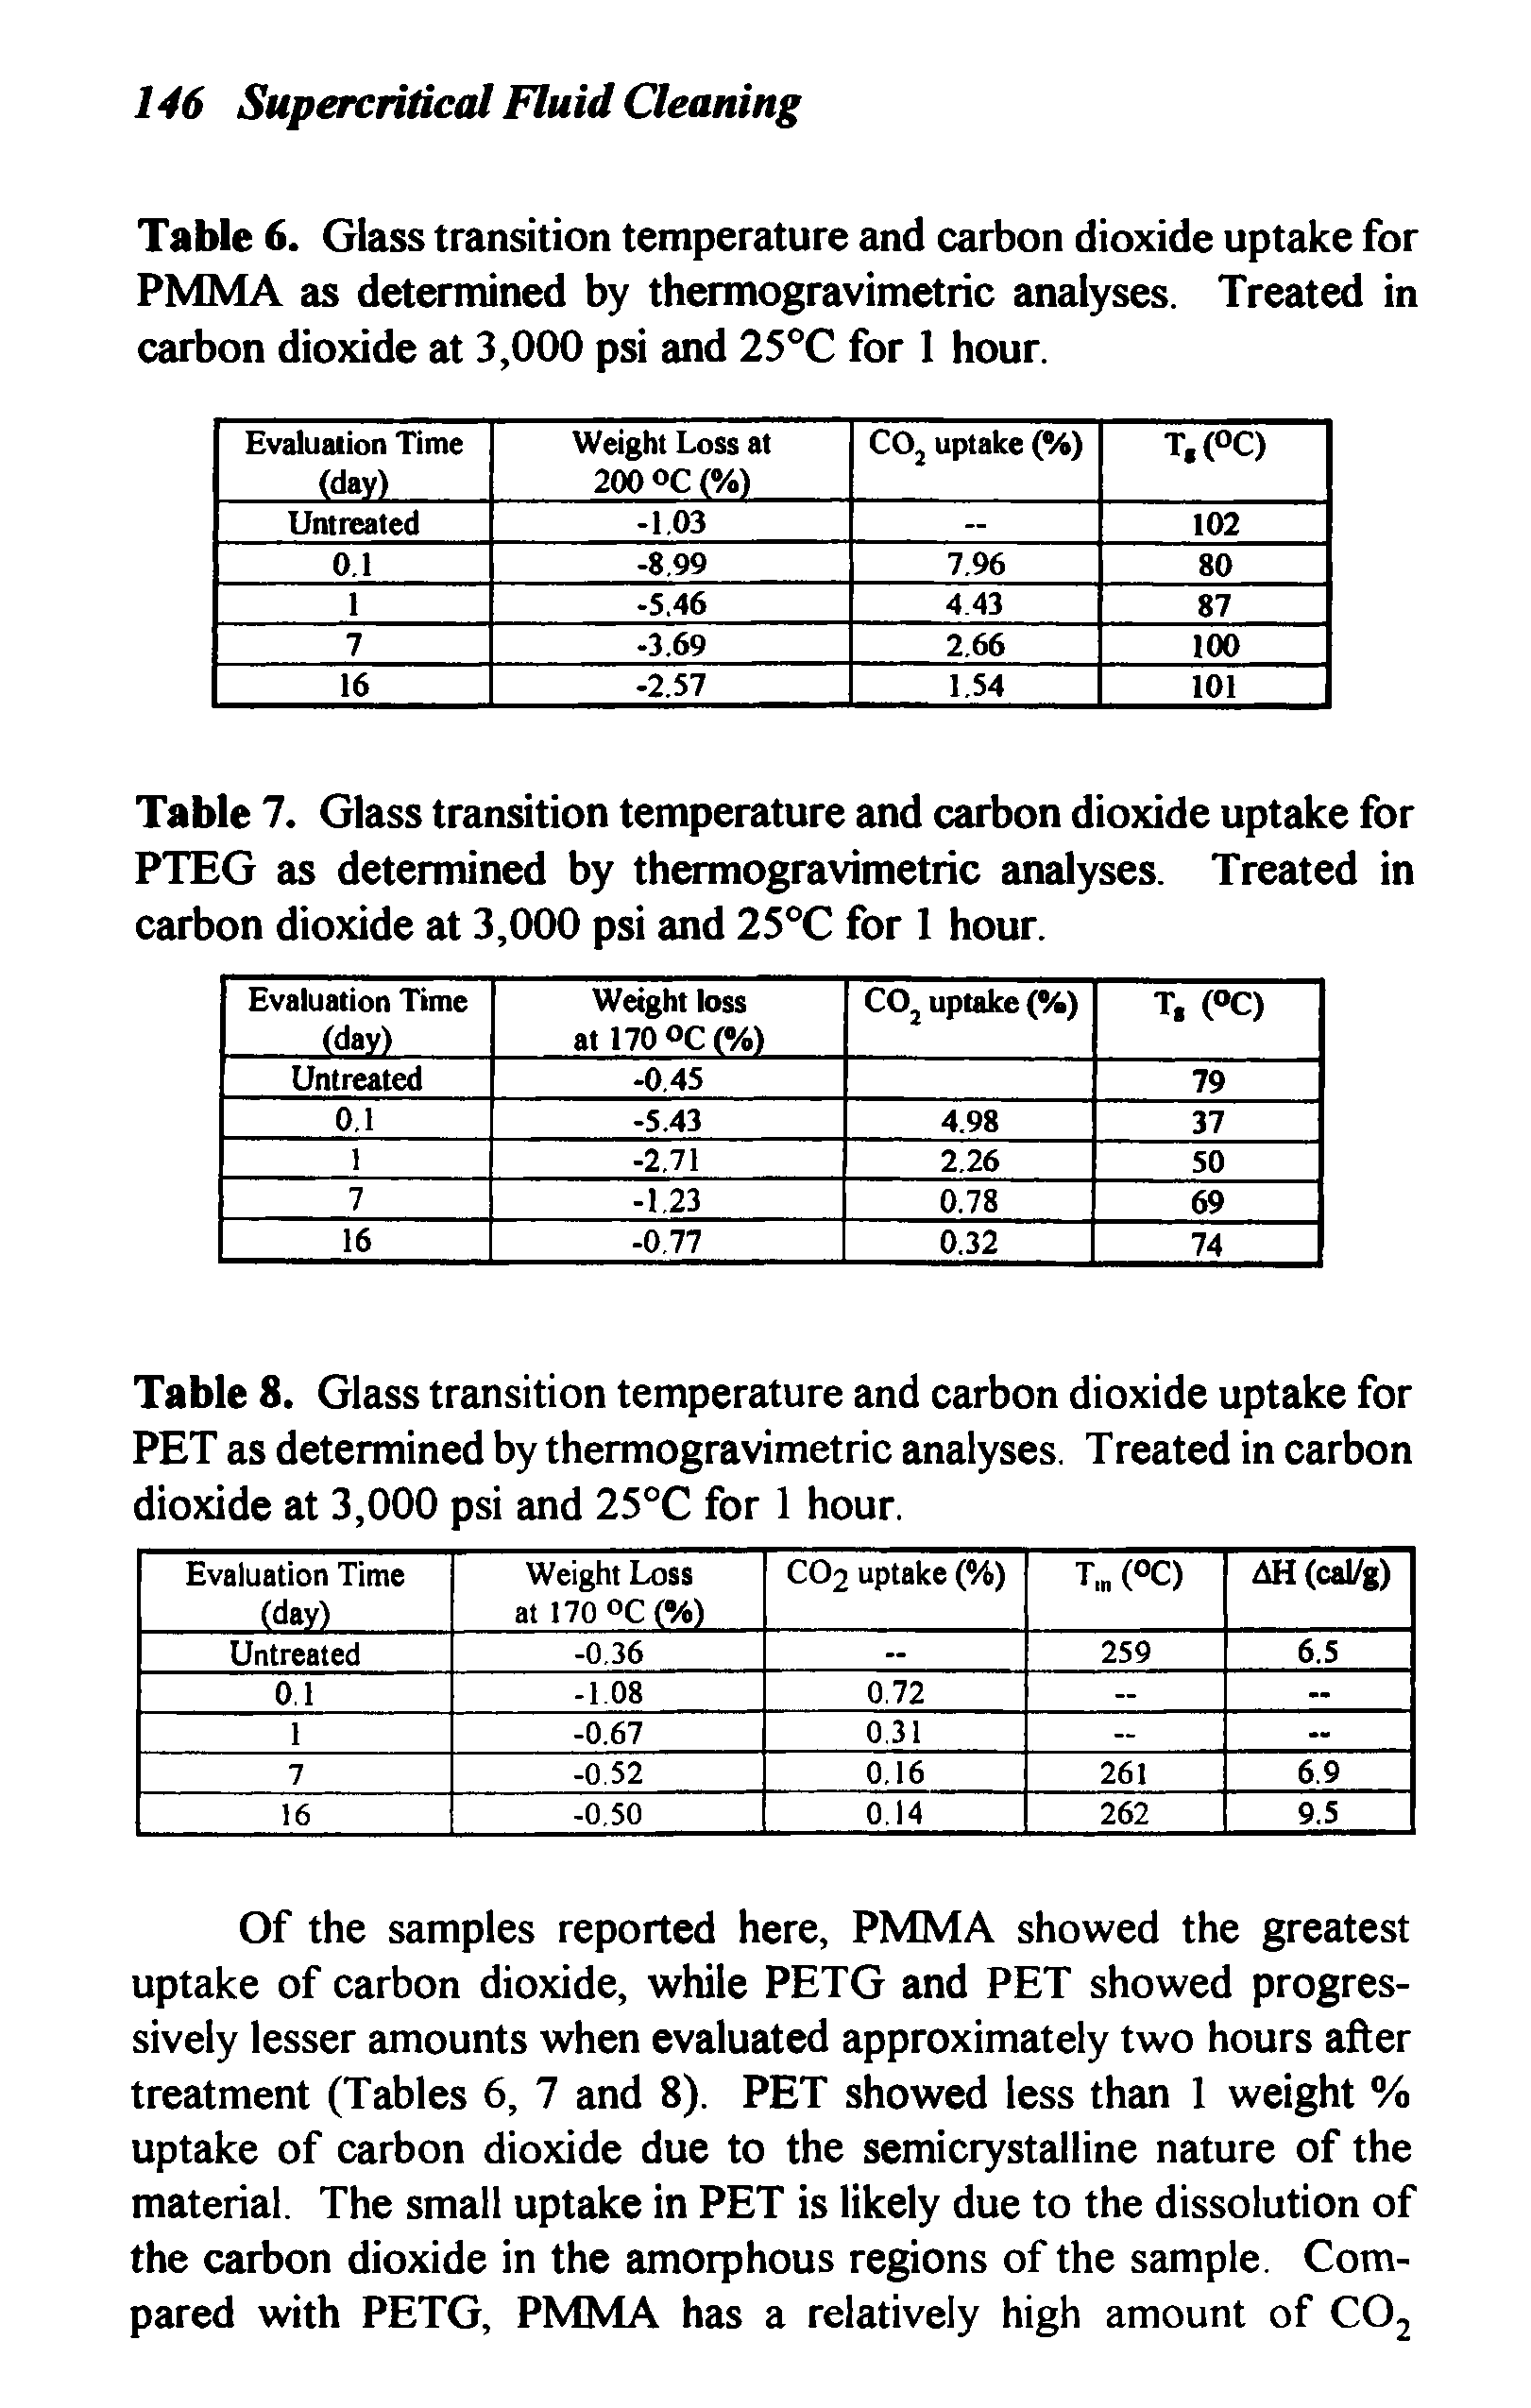 Table 6. Glass transition temperature and carbon dioxide uptake for PMMA as determined by thermogravimetric analyses. Treated in carbon dioxide at 3,000 psi and 25°C for 1 hour.